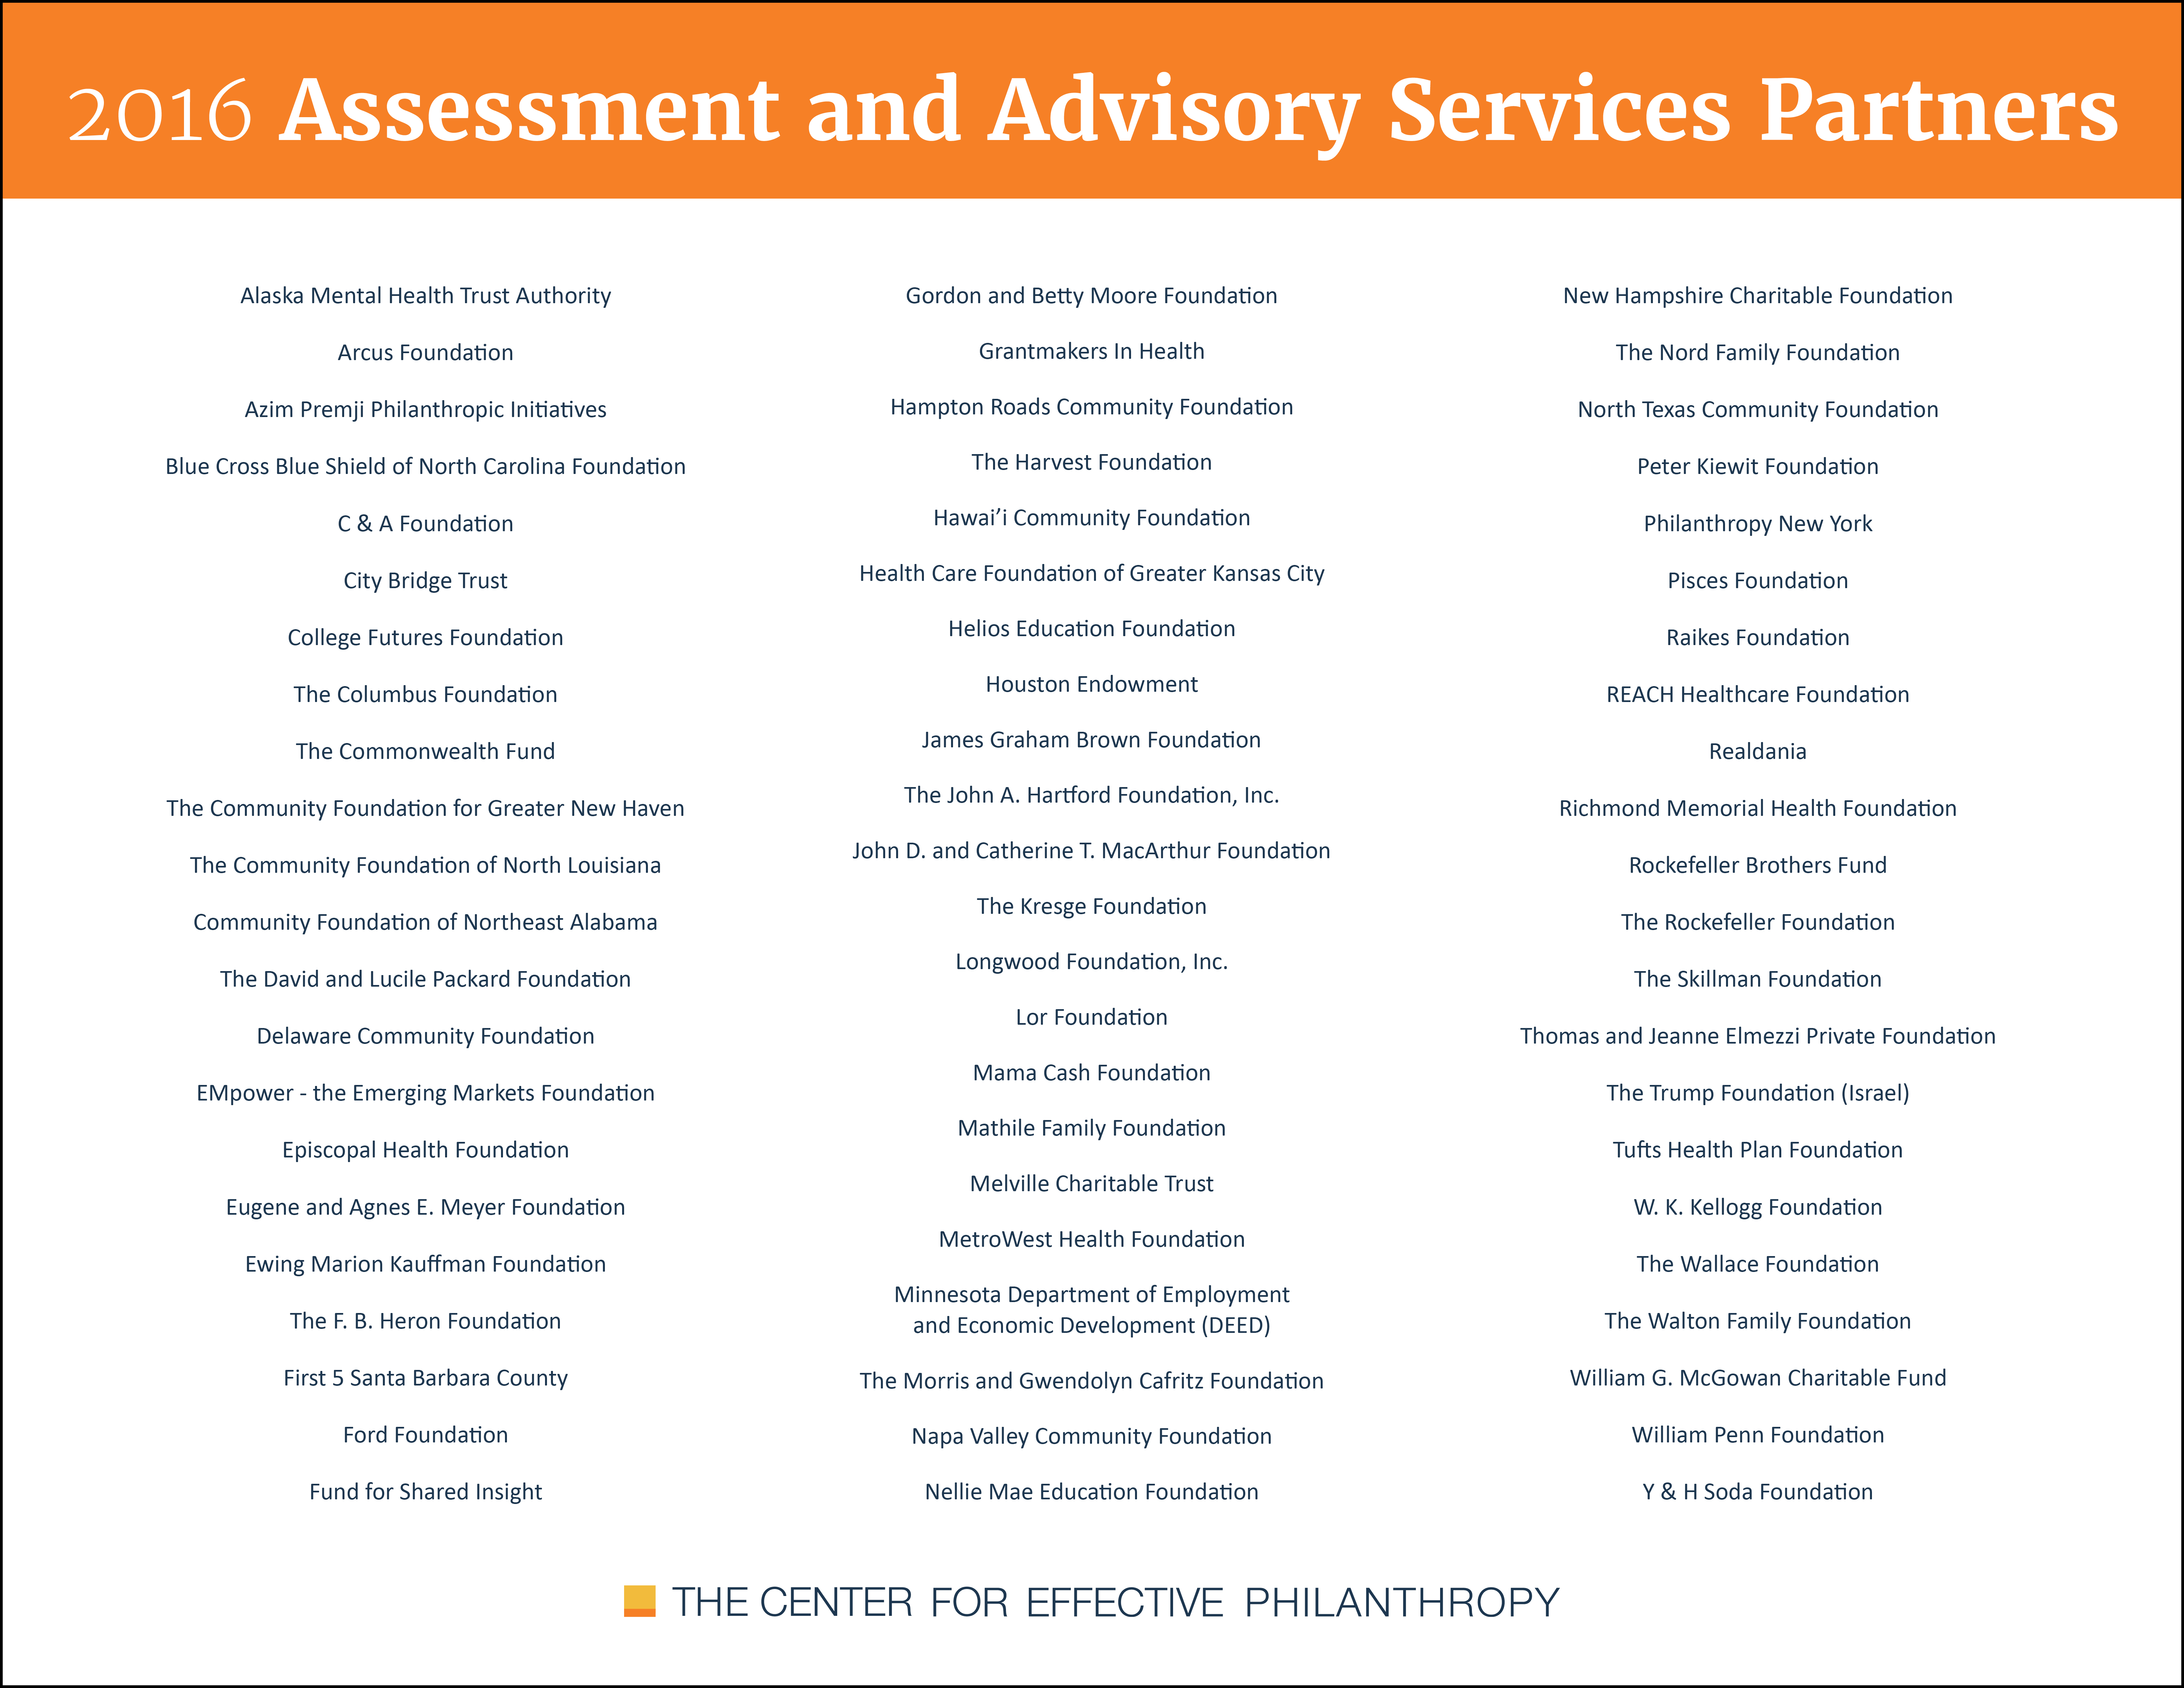 inline_552_http://cep.org/wp-content/uploads/2016/12/CEP-Assessment-Advisory-Services-Partners-2016.jpg